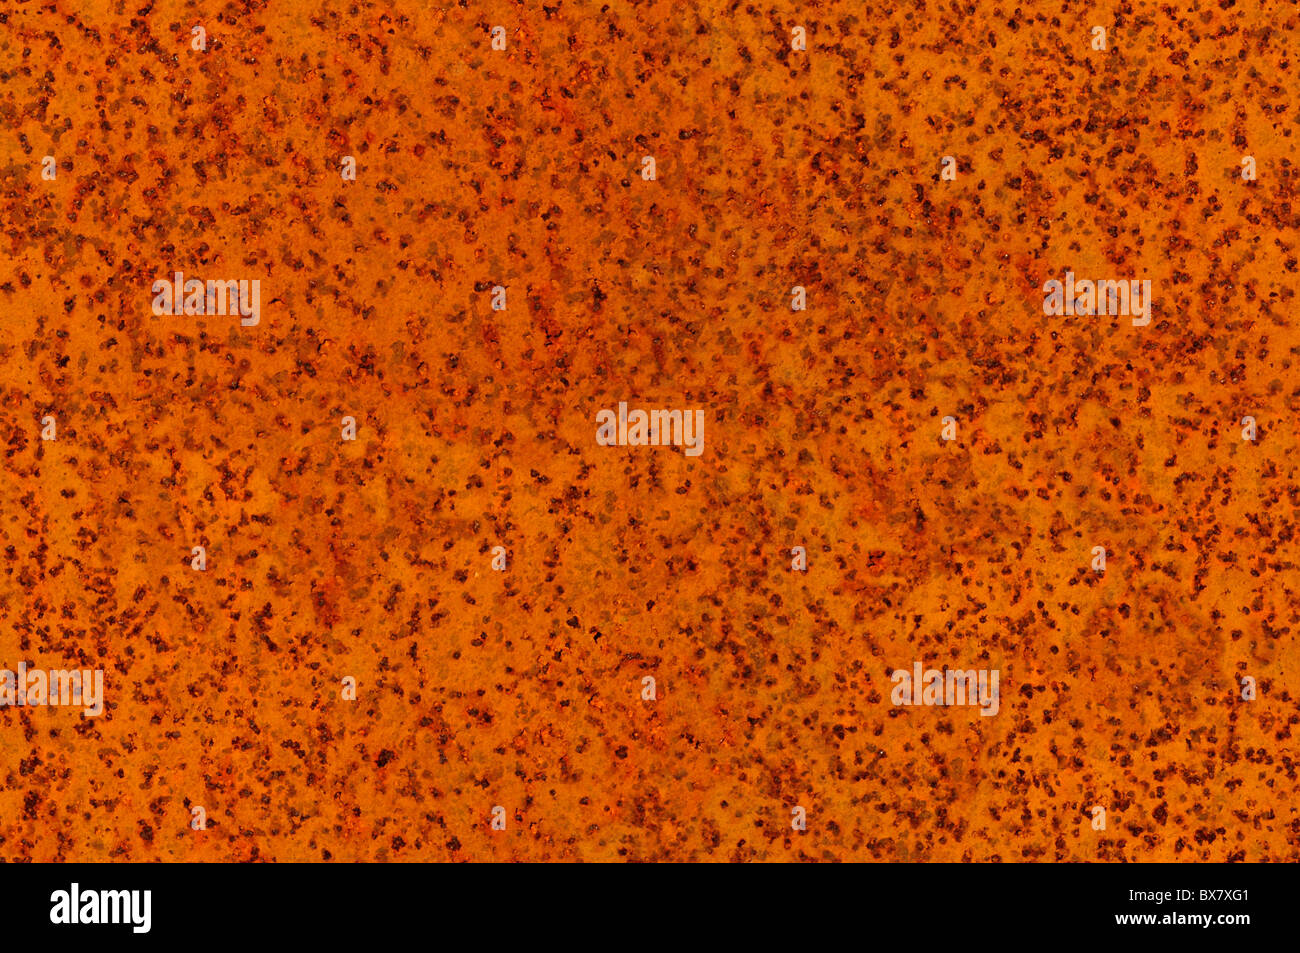 Rusted corroded metal surface seamlessly tileable Stock Photo